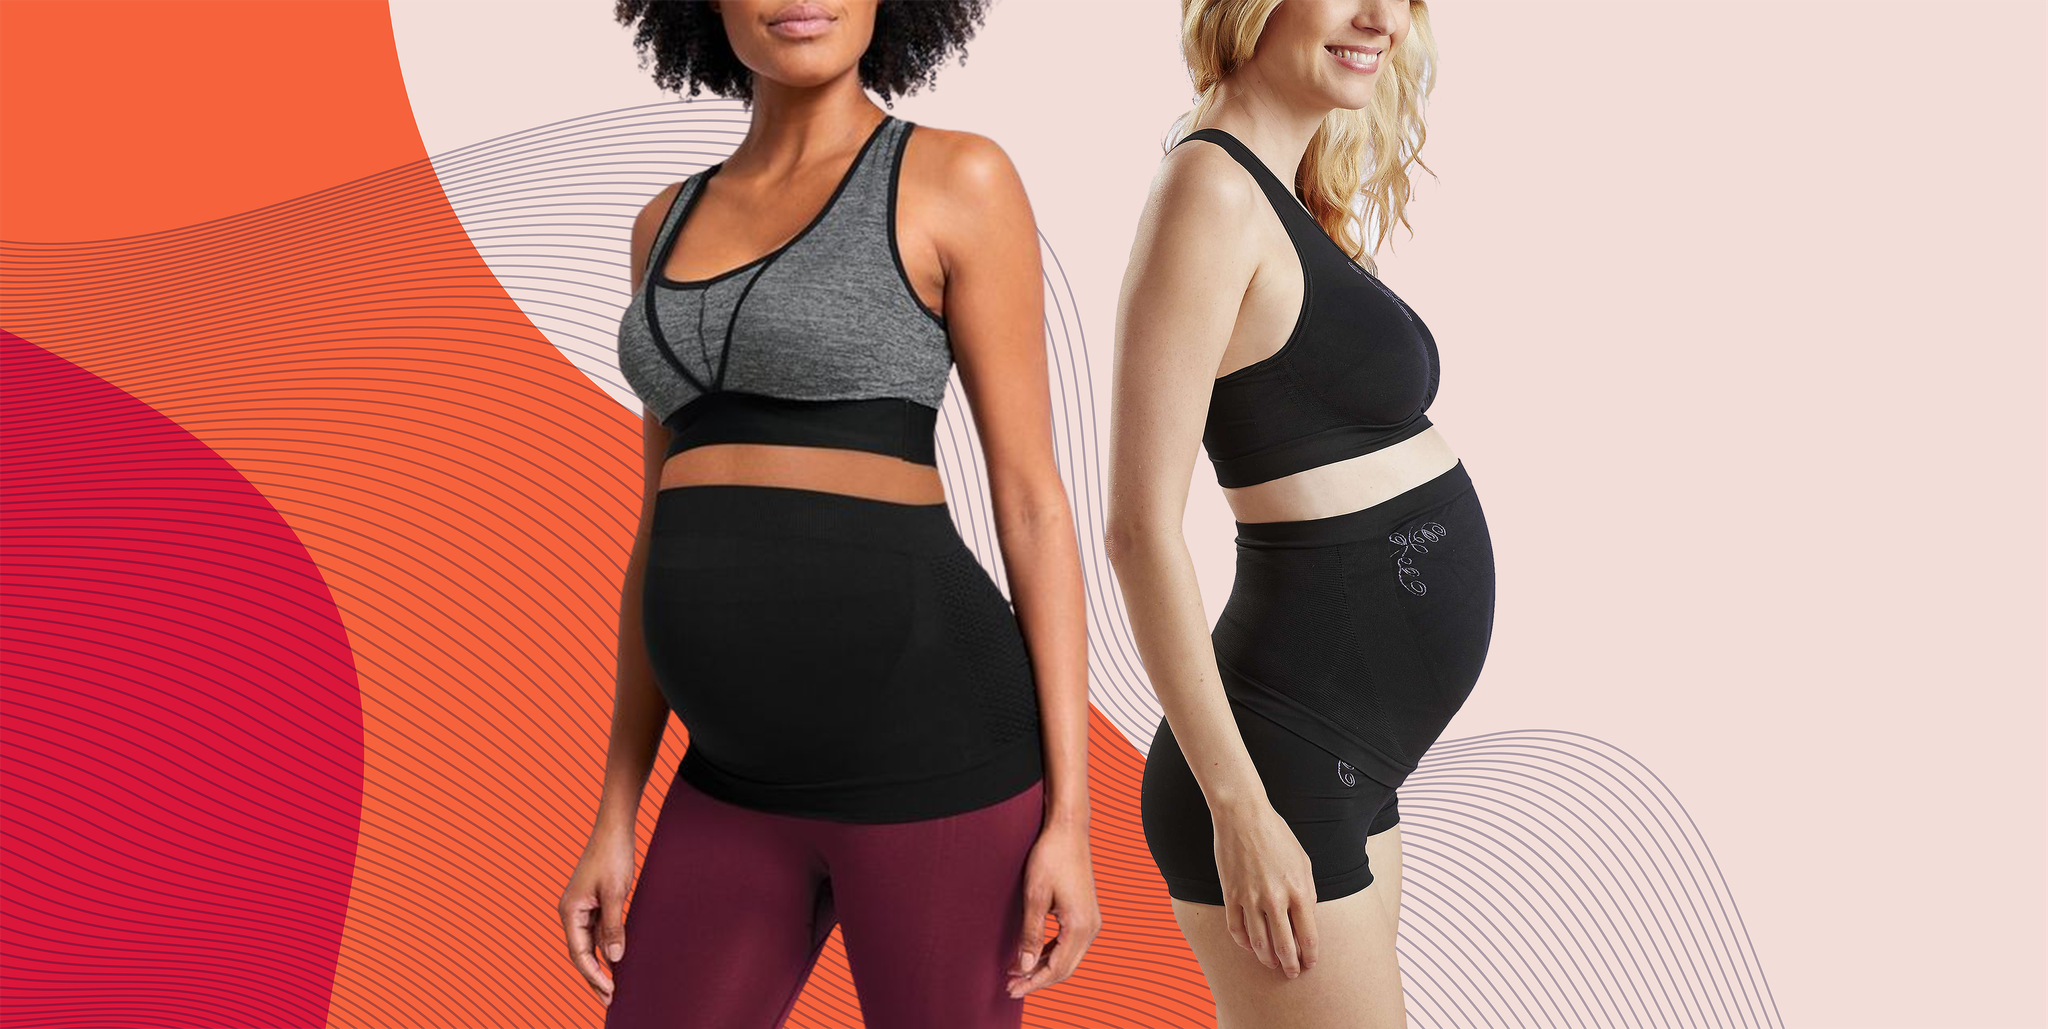 11 best pregnancy belly bands and belts